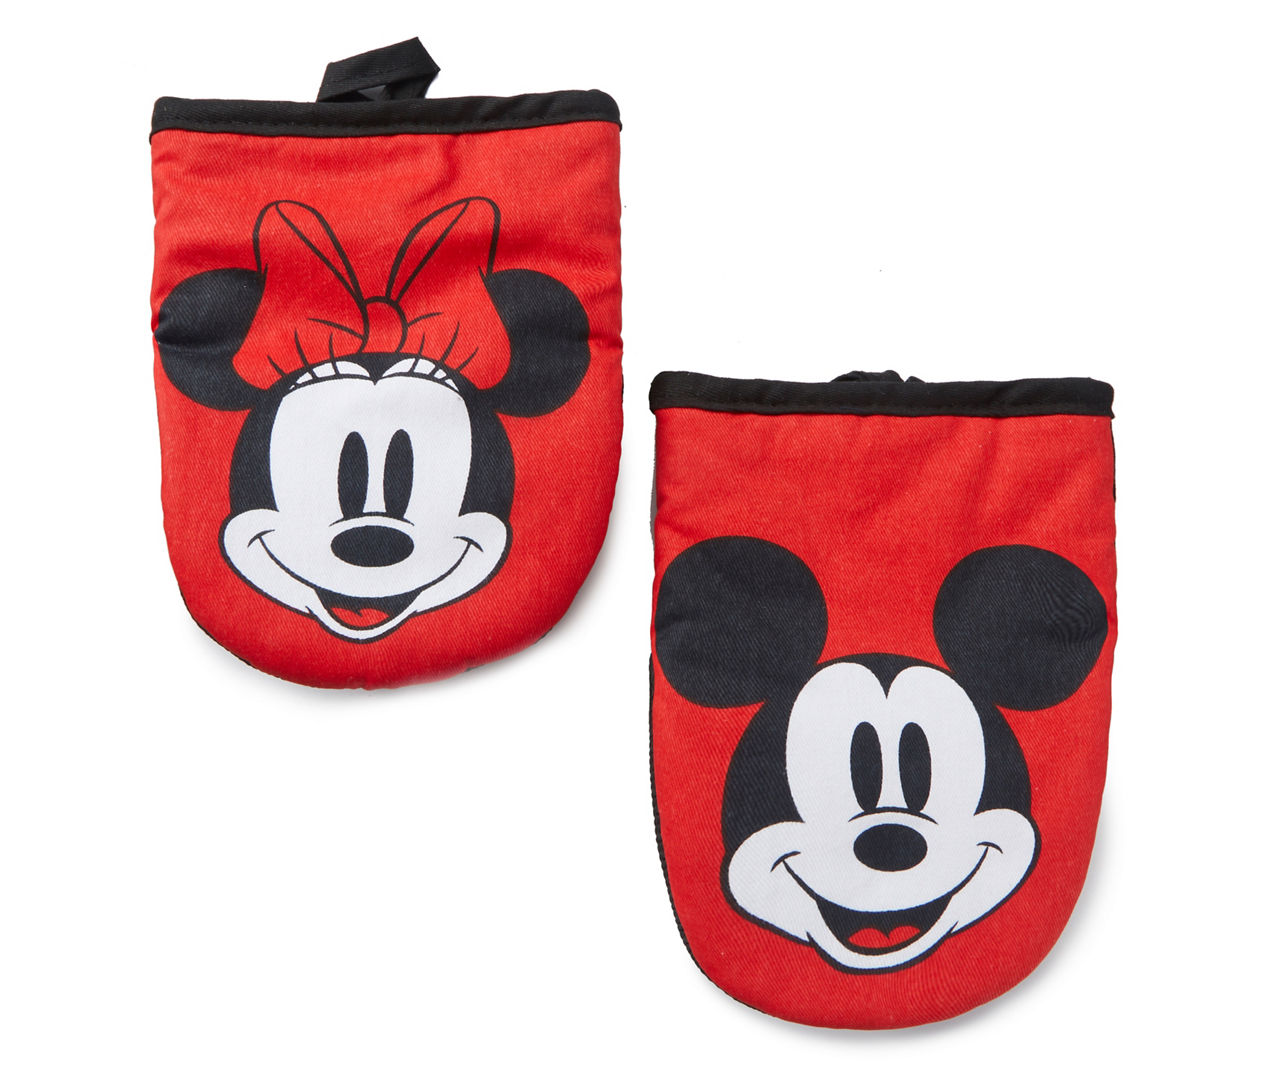 Disney Minnie Mouse Bow Pattern Oven Mitts, 2-Pack